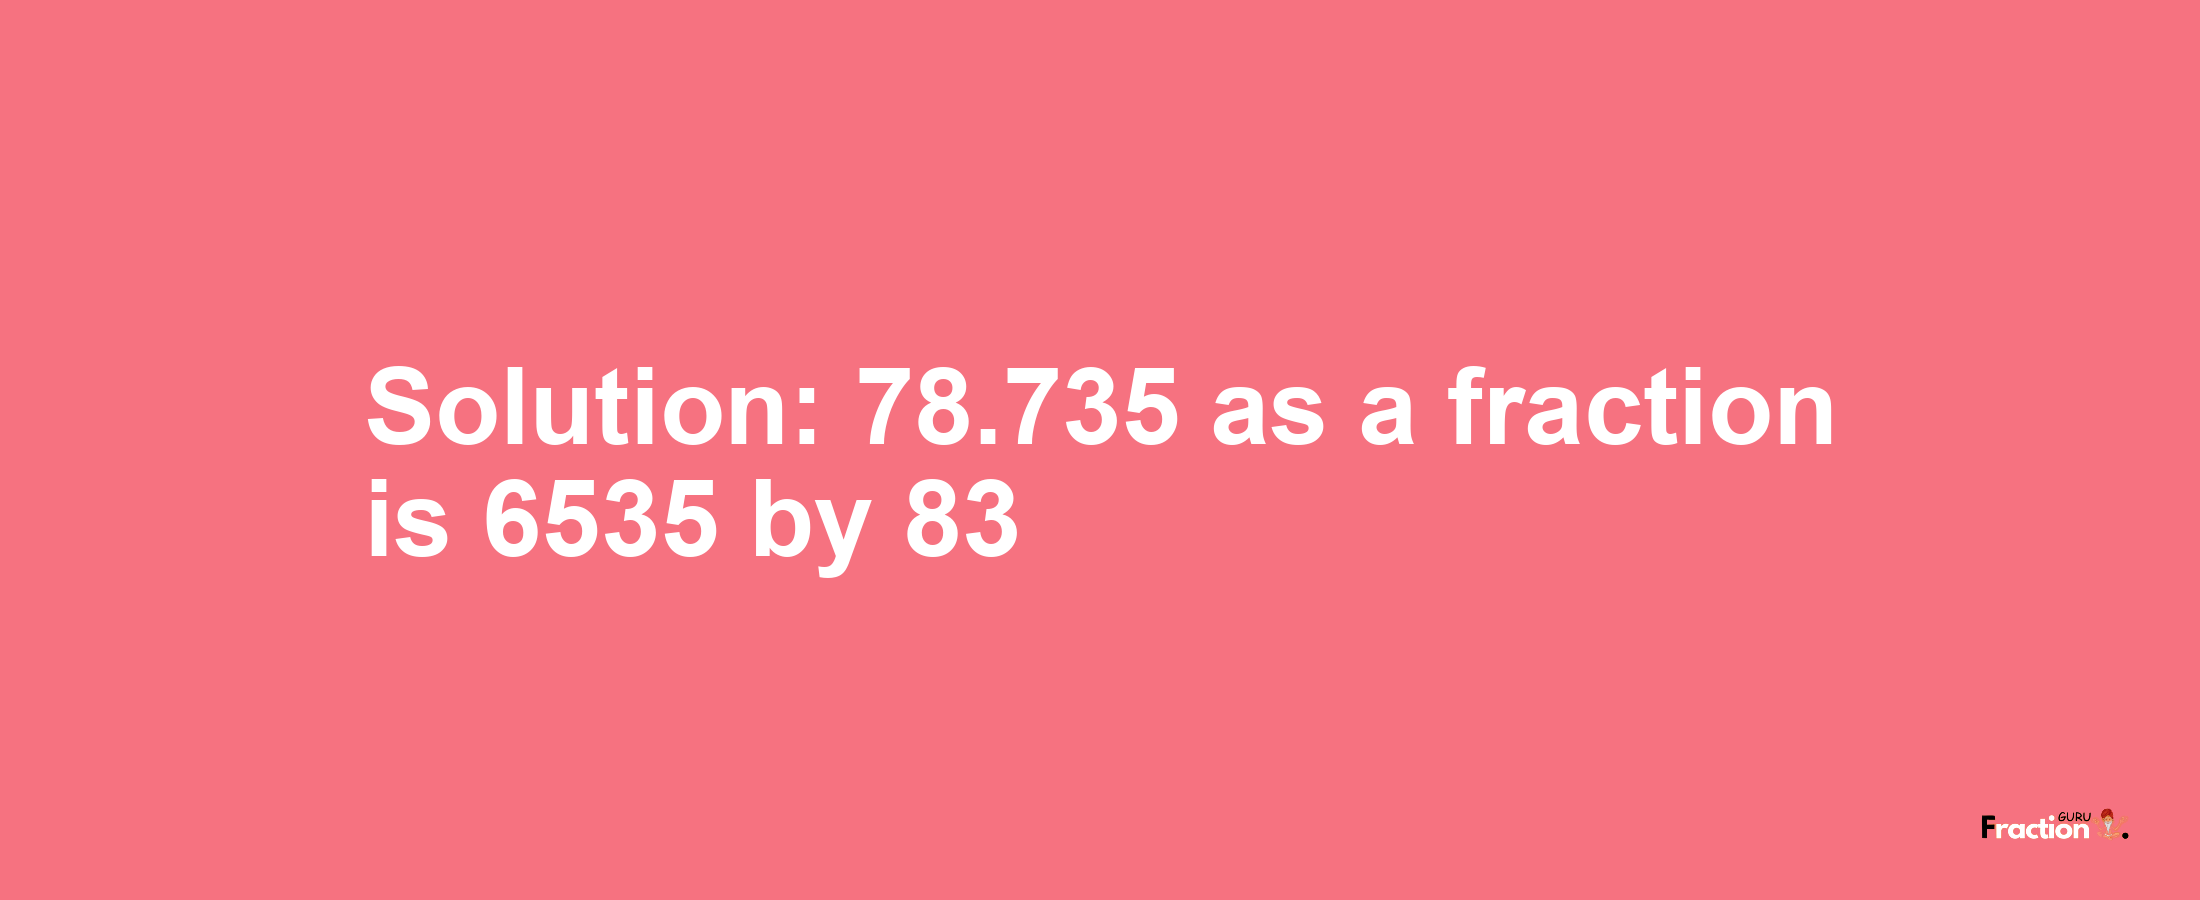 Solution:78.735 as a fraction is 6535/83